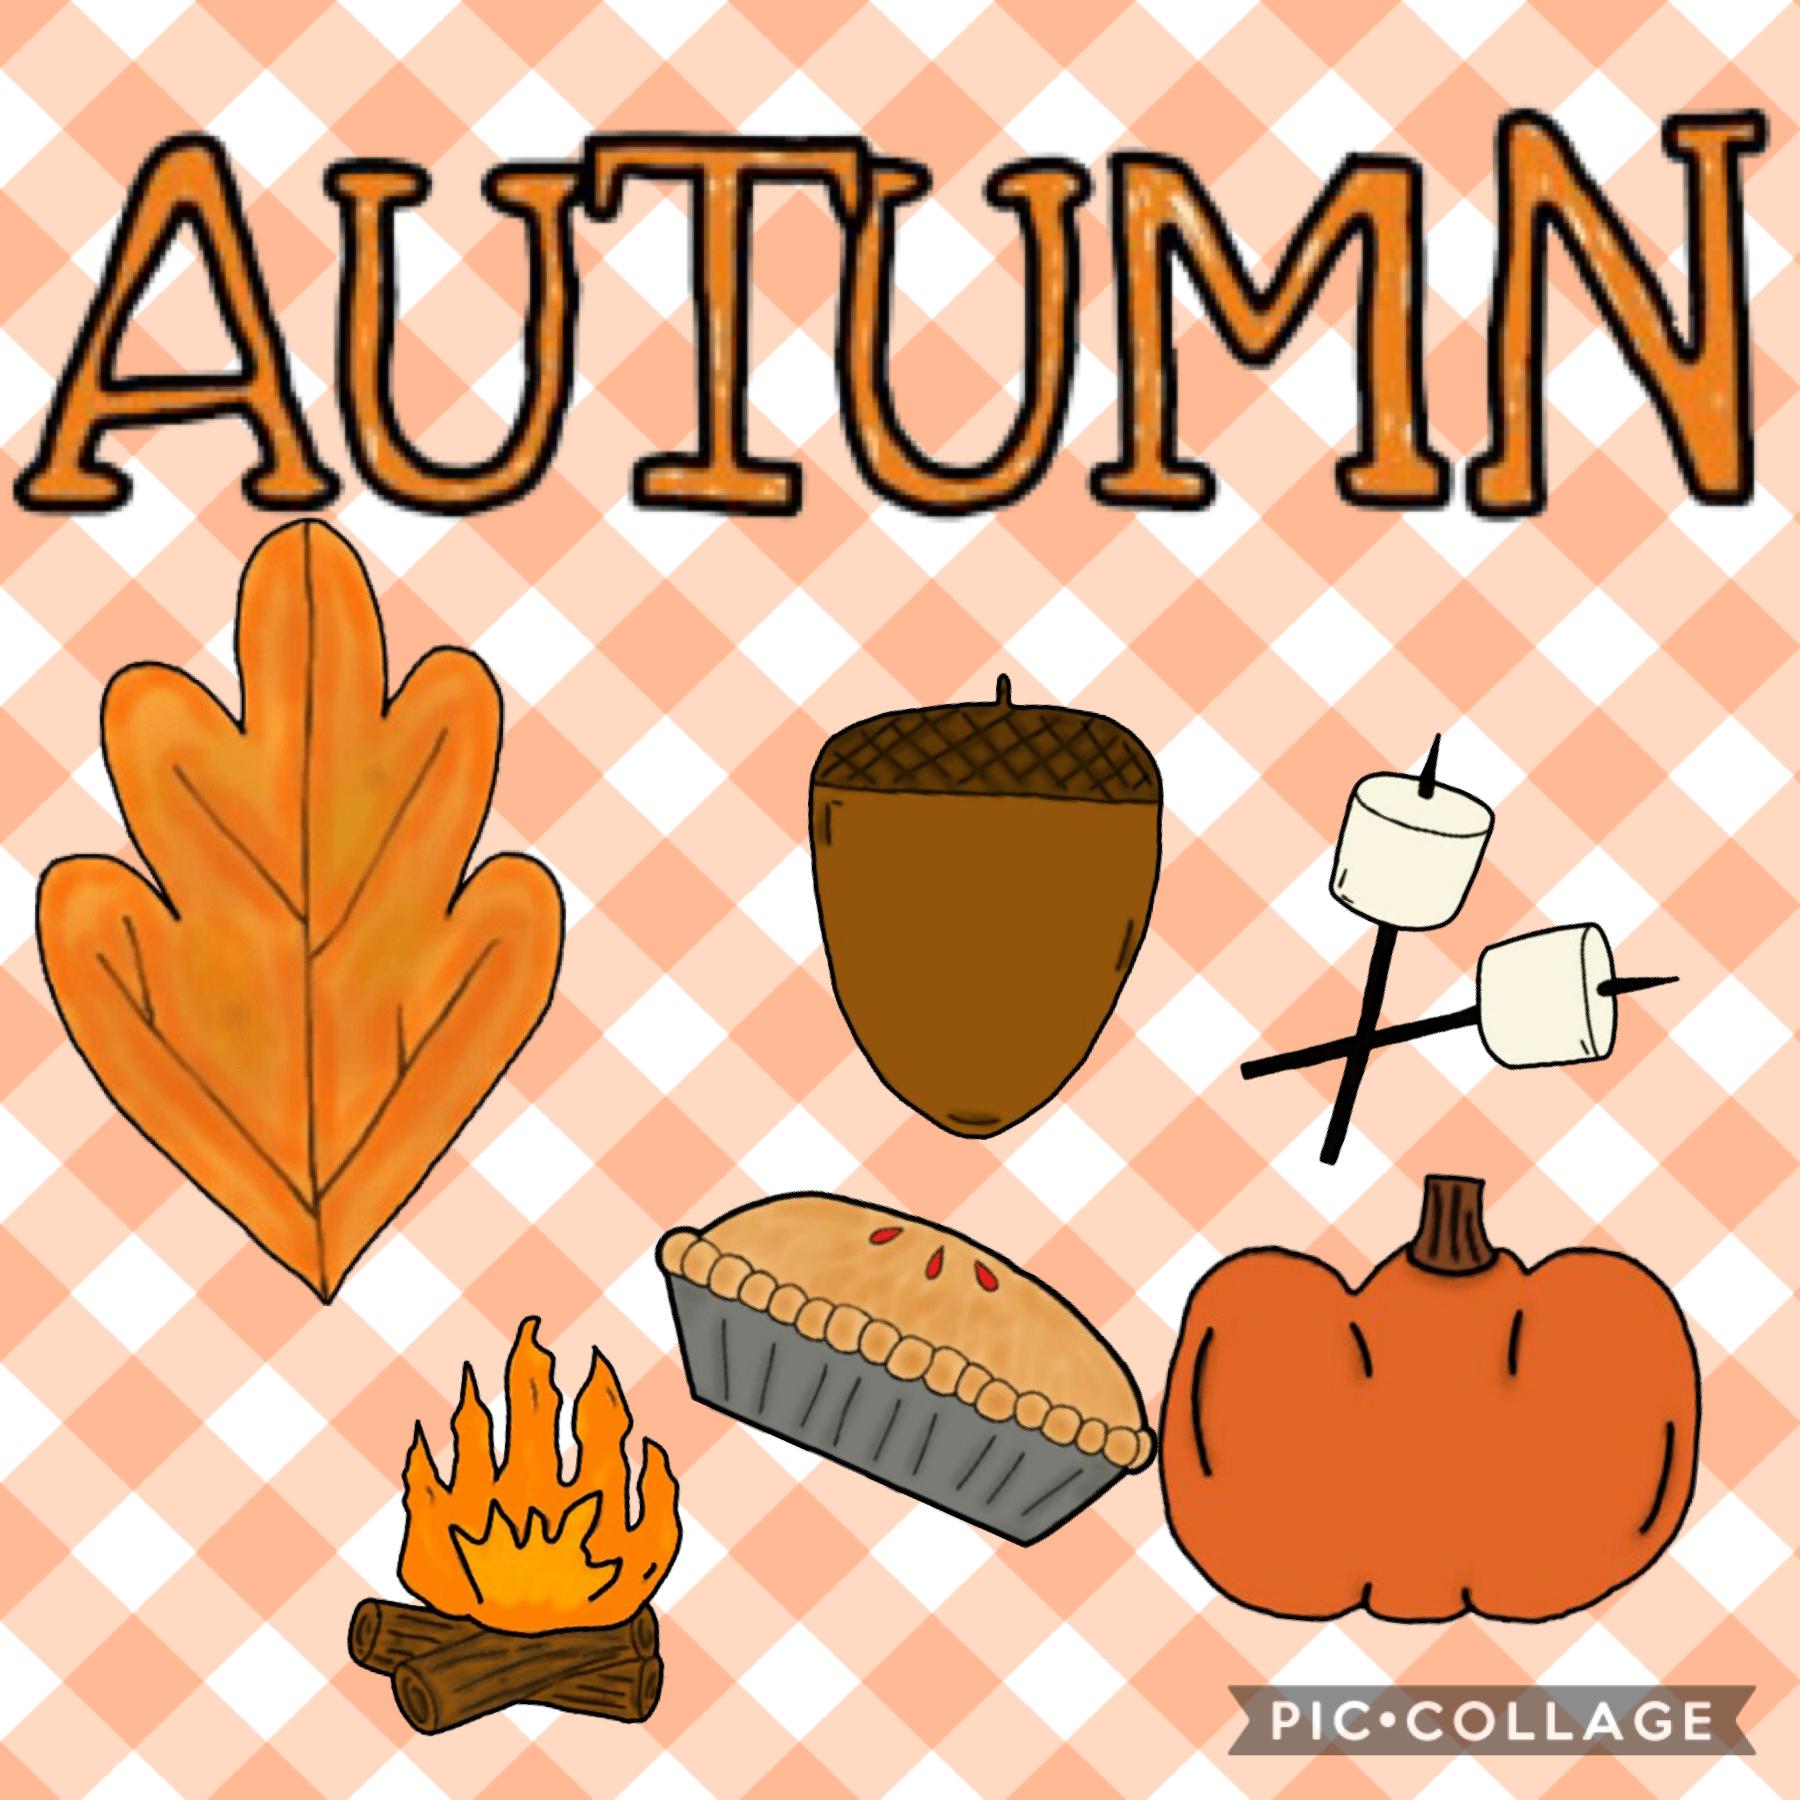 Tap here
I love the autumn trick-or-treating and my family coming over for all the fest I also love when I can see my family that’s a lot of fun when aI get to see them. My birthday is around the fall so it’s really fun is yours?❤️❤️❤️